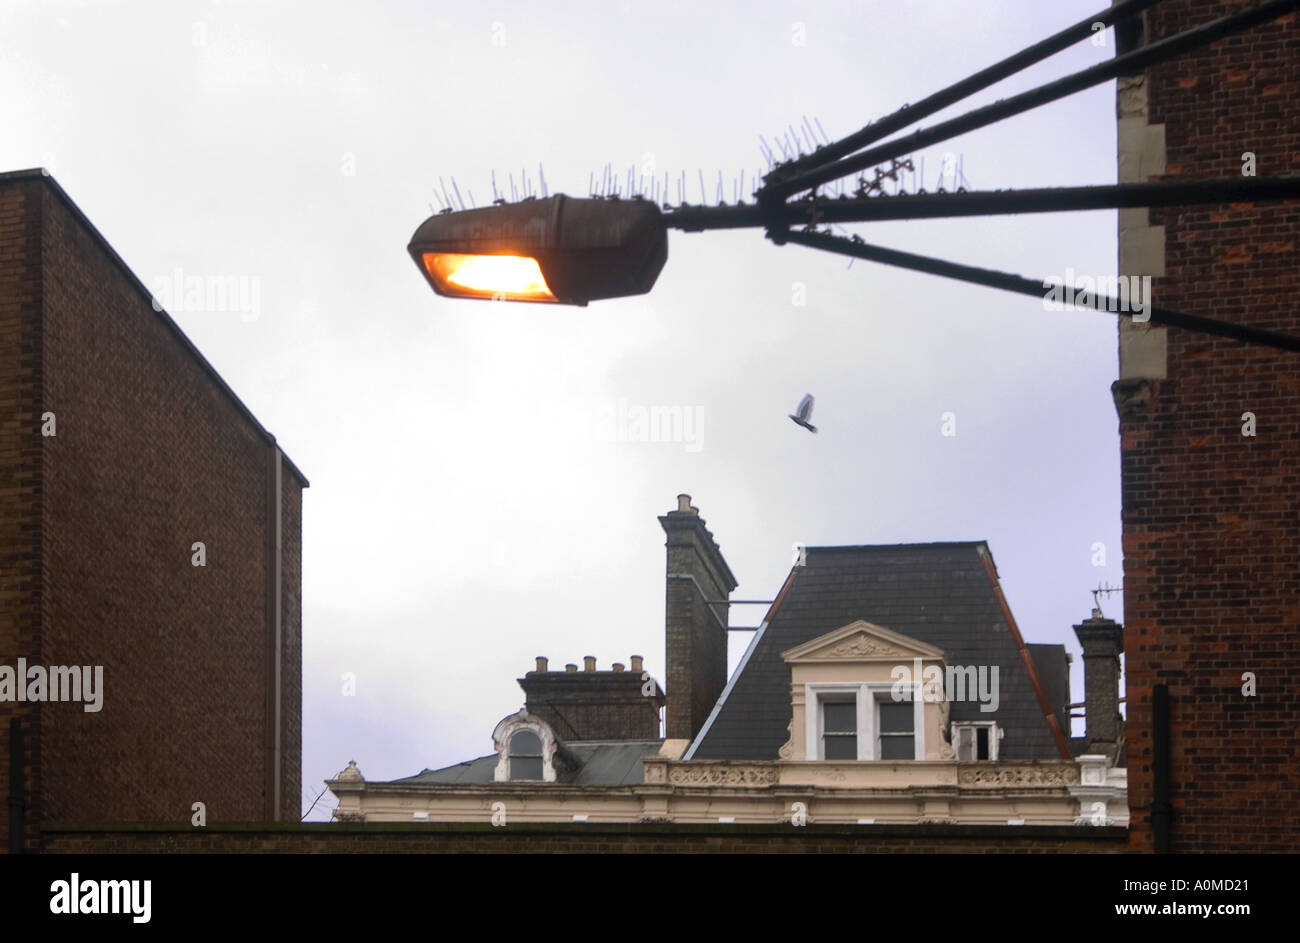 View of a London roof top and cloudy sky with lit streetlight with wire bird deterant on it in foreground and bird flying by Stock Photo